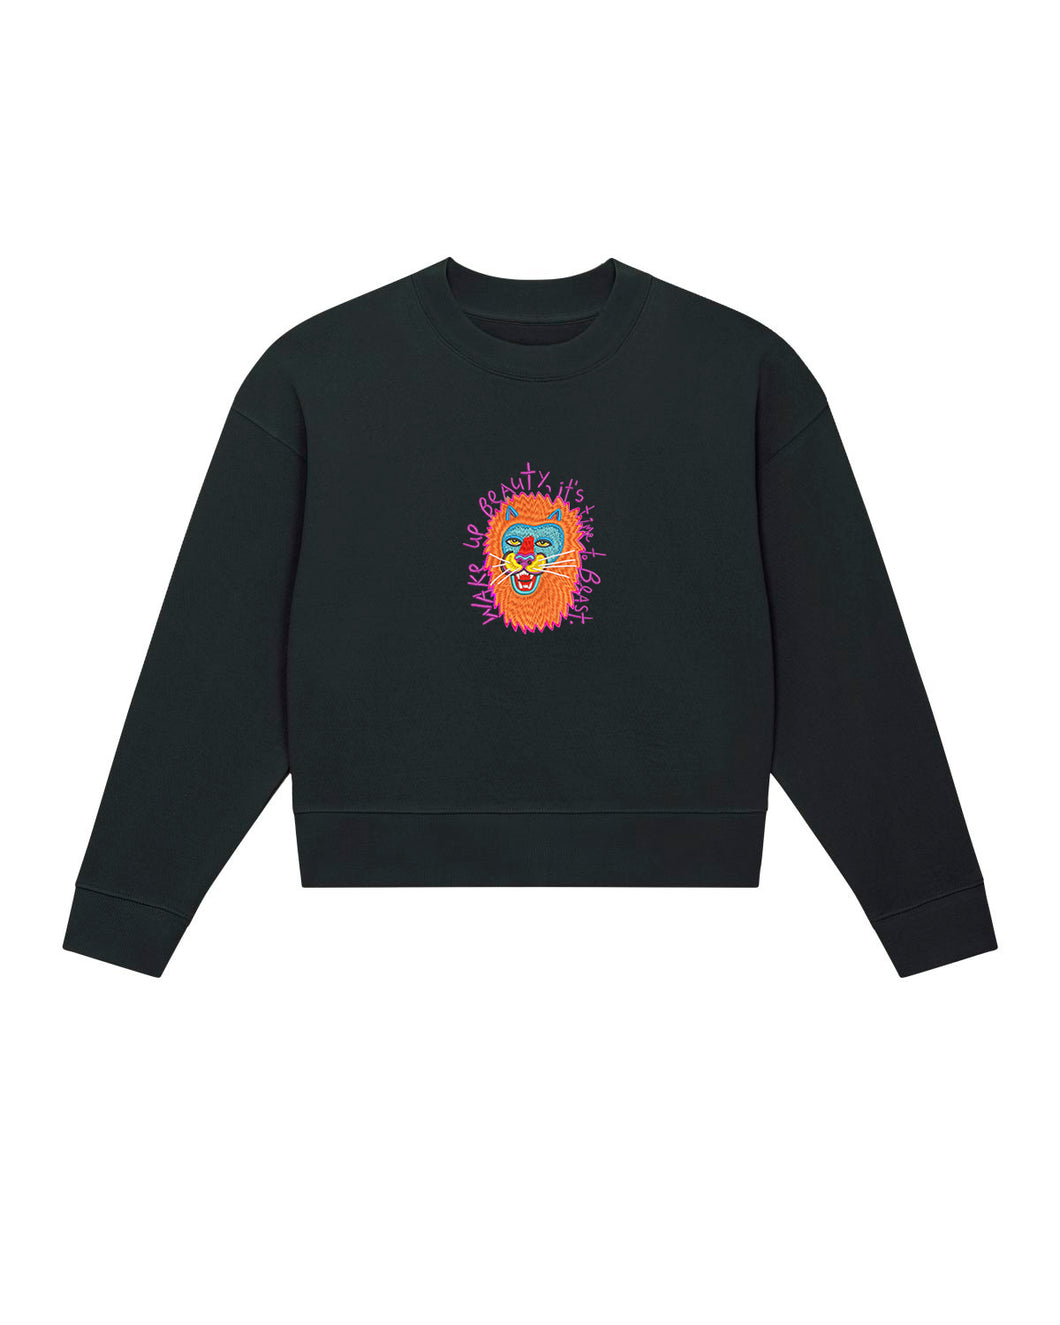 Lion - WAKE UP BEAUTY, IT'S TIME TO BEAST. Embroidered WOMEN'S CROPPED CREW NECK SWEATSHIRT